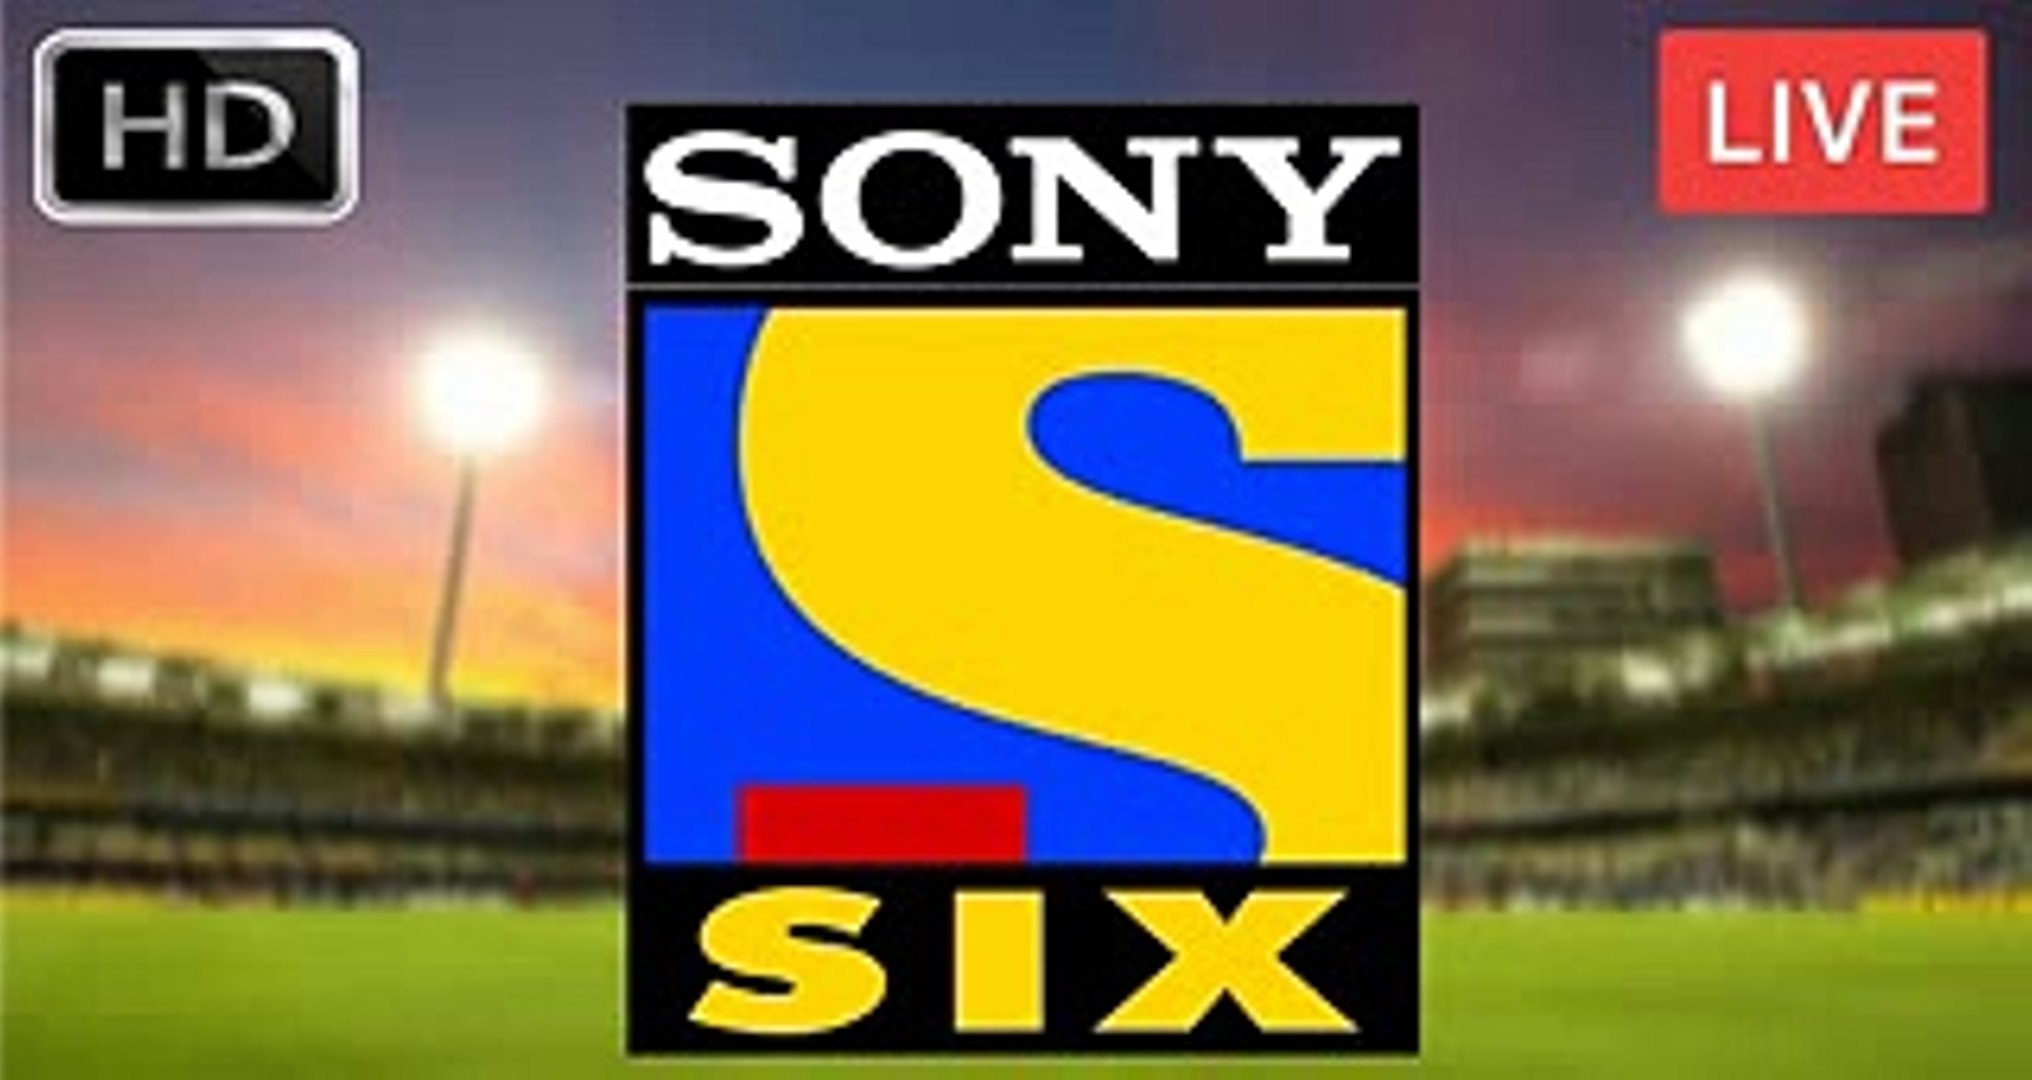 Sony Six live streaming Big Bash League 2019 semi-final and final with highlights